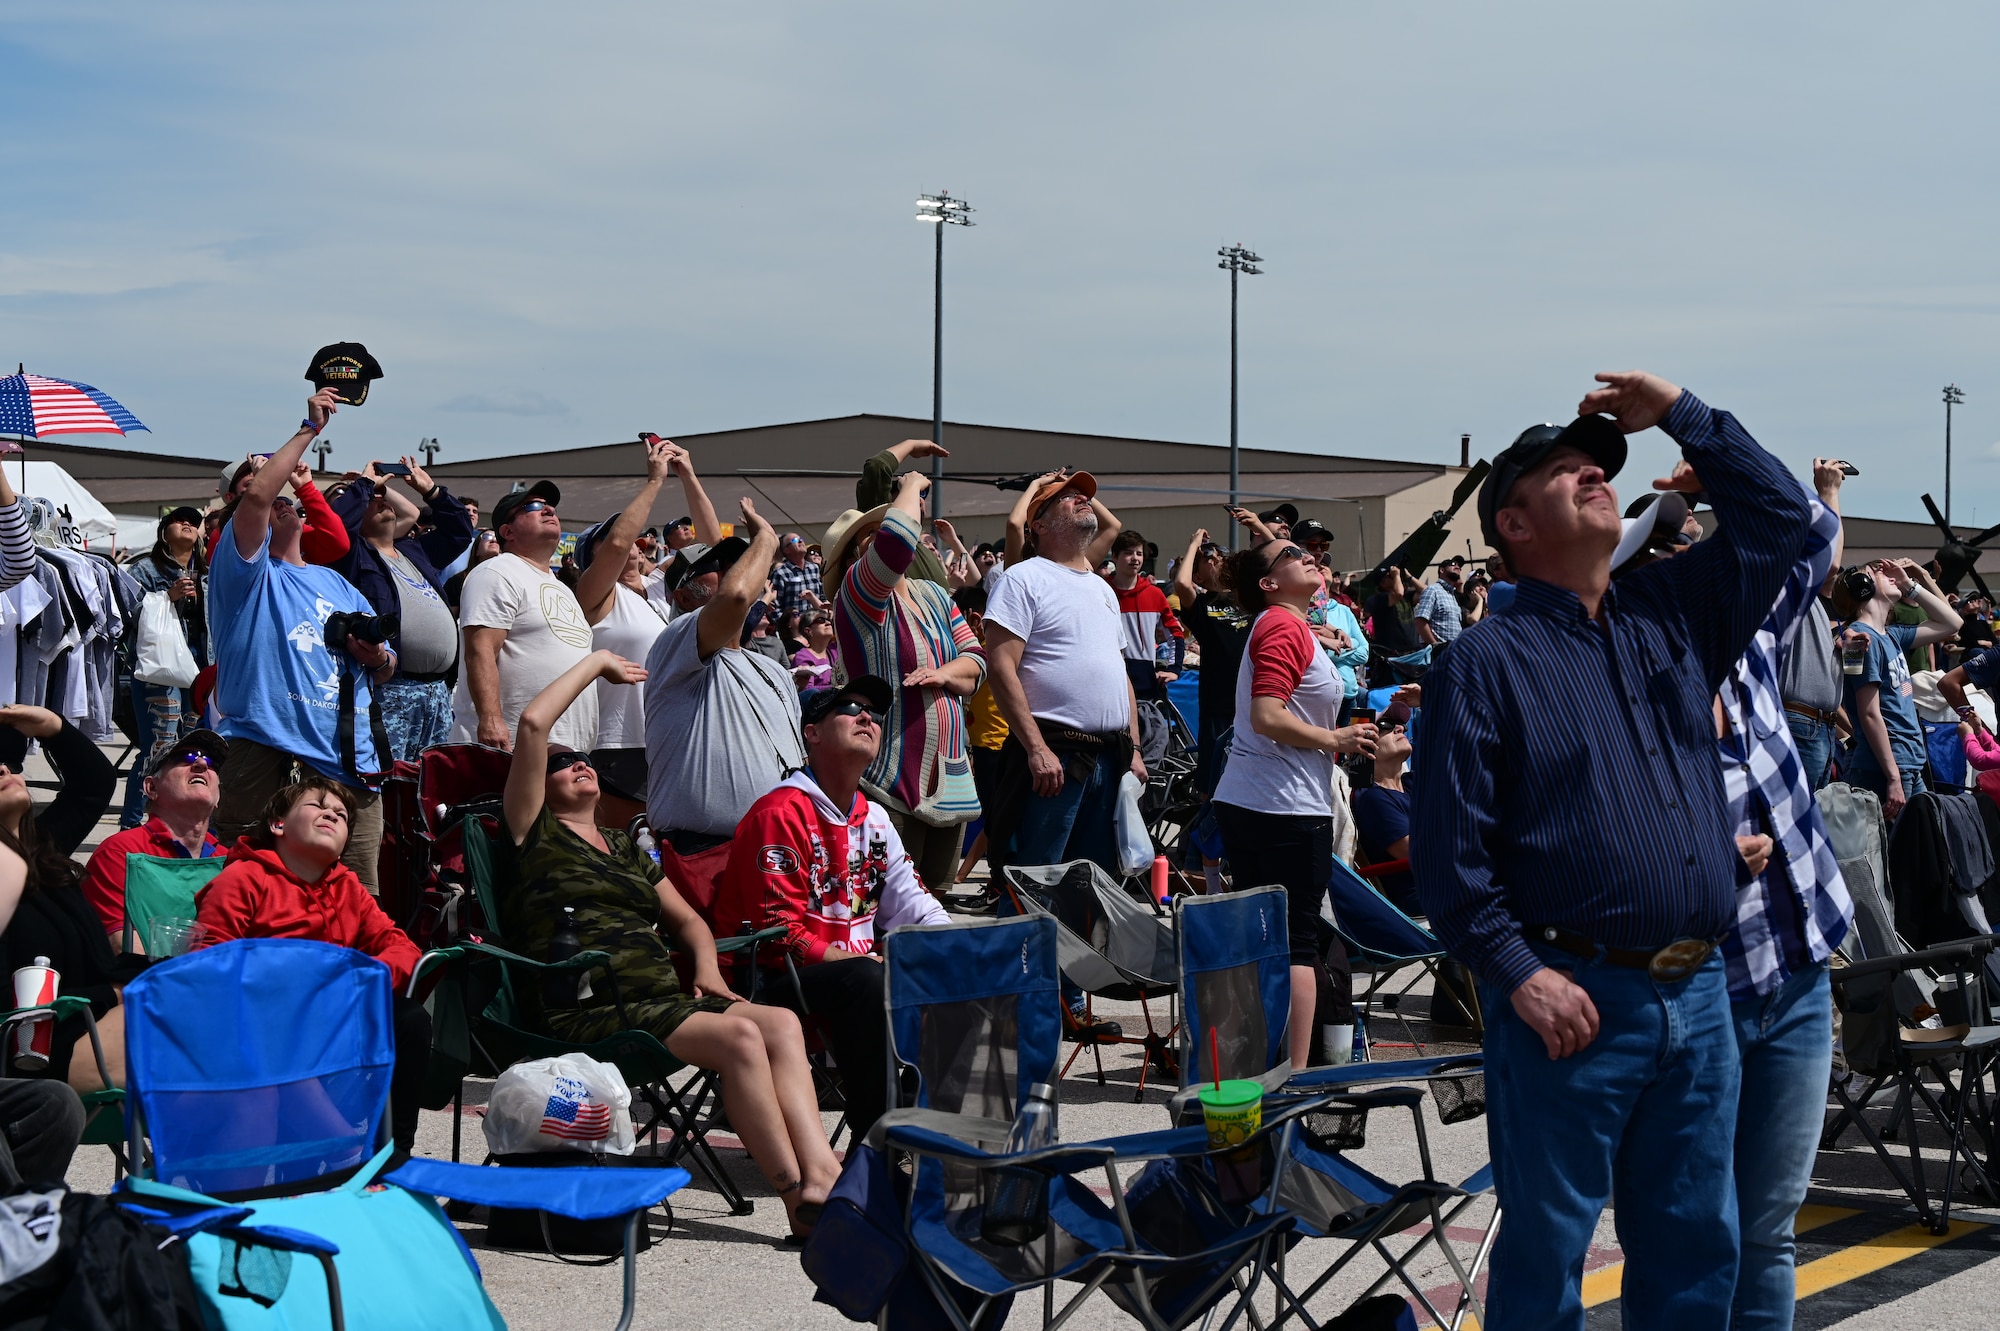 Attendees at the 2022 Ellsworth Air and Space Show watch as an F-22 Raptor soars above    Ellsworth Air Force Base, S.D., May 15, 2022. This was Ellsworth’s first airshow since 2015 and hosted over 60,000 guests. (U.S. Air Force photo by Staff Sgt. Hannah Malone)